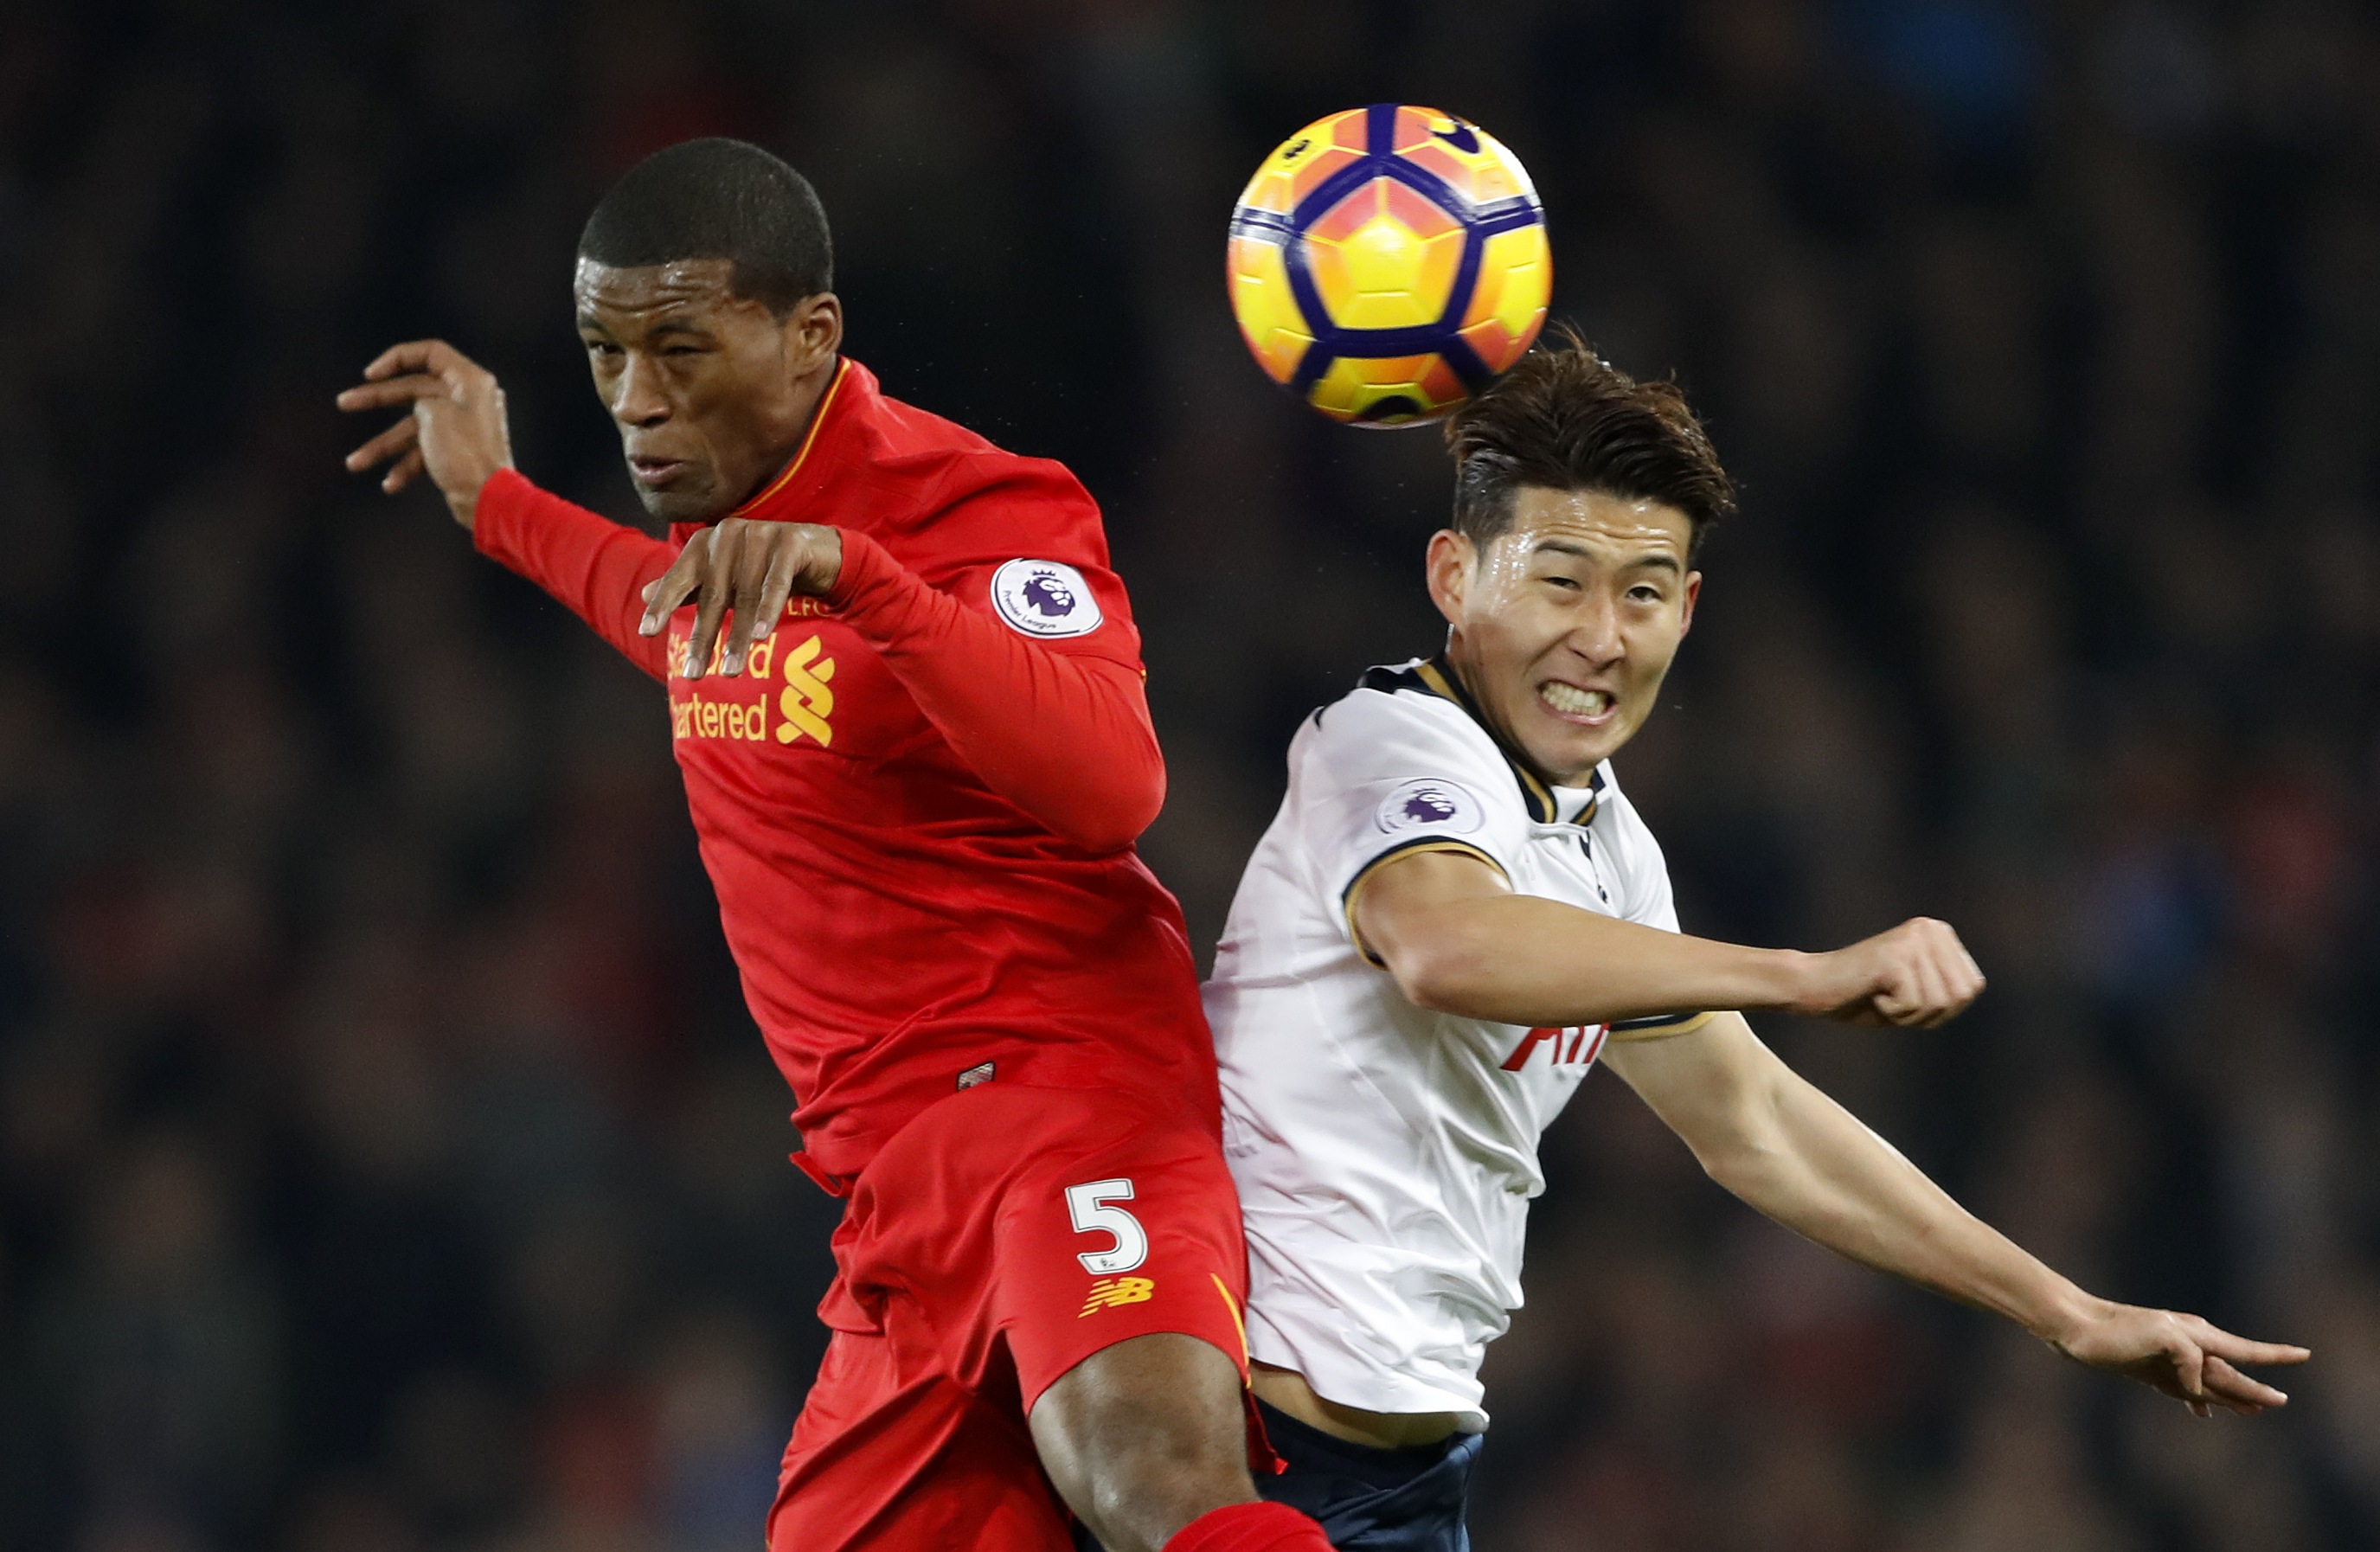 Football: Liverpool win over Spurs not just down to Mane, says Wijnaldum